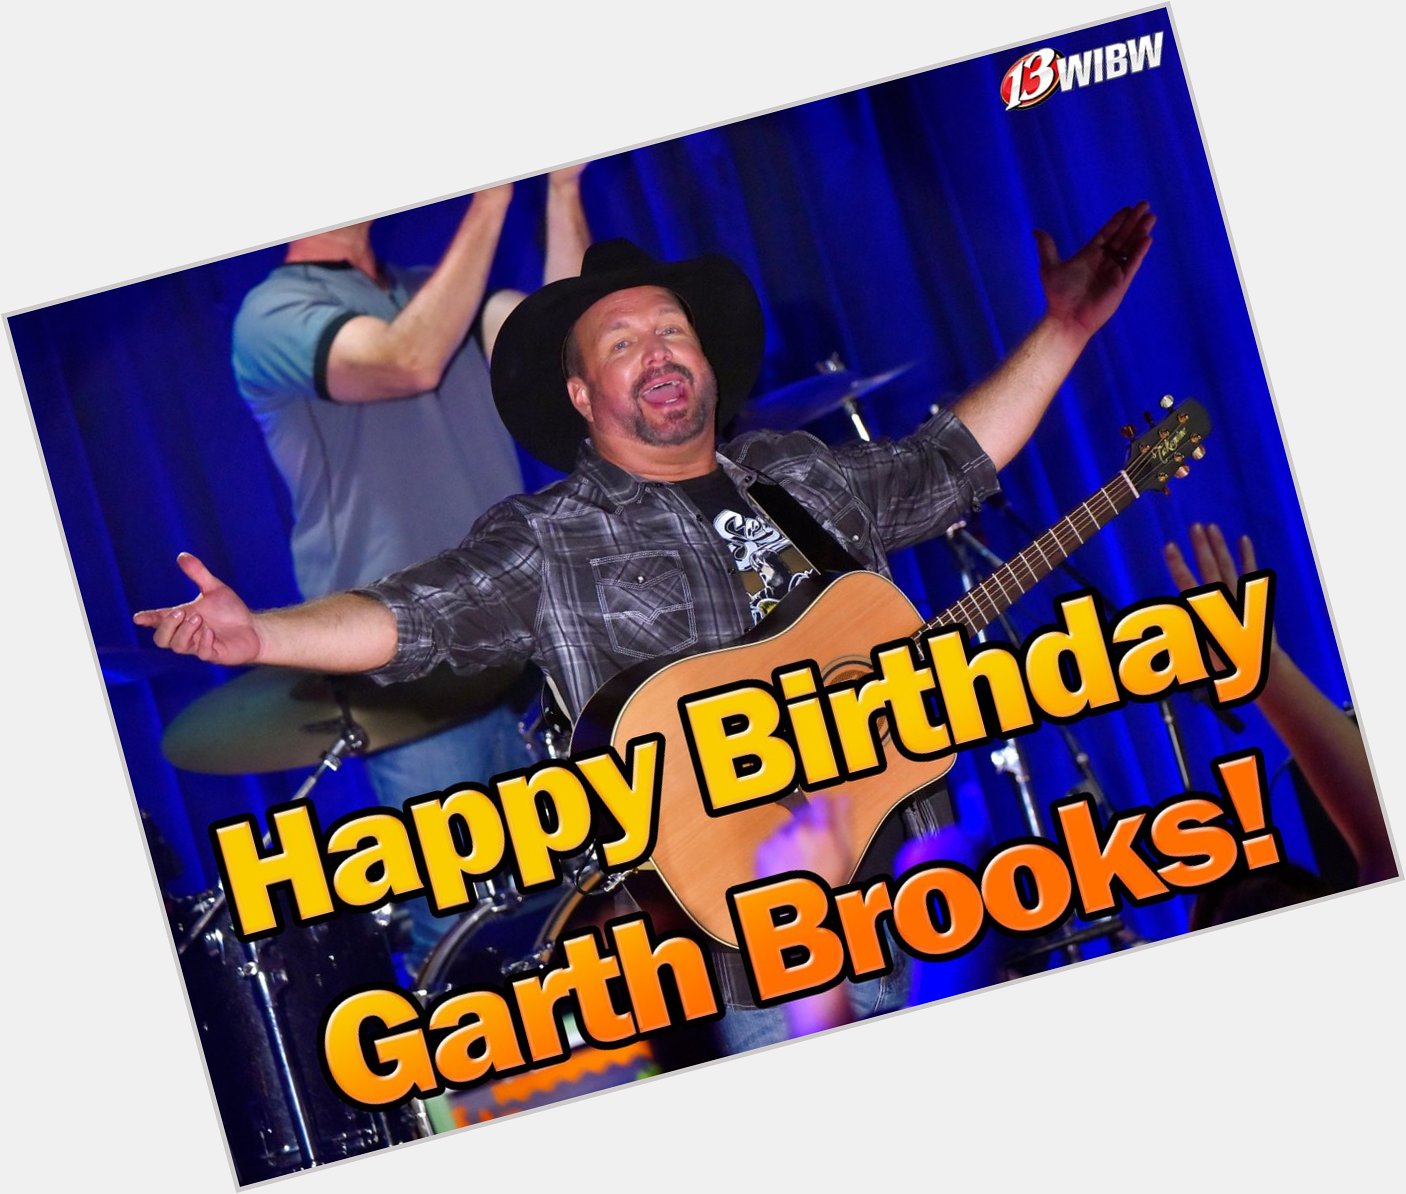 He\s one of the most loved country music artists of all time.  Happy birthday to Garth Brooks! 